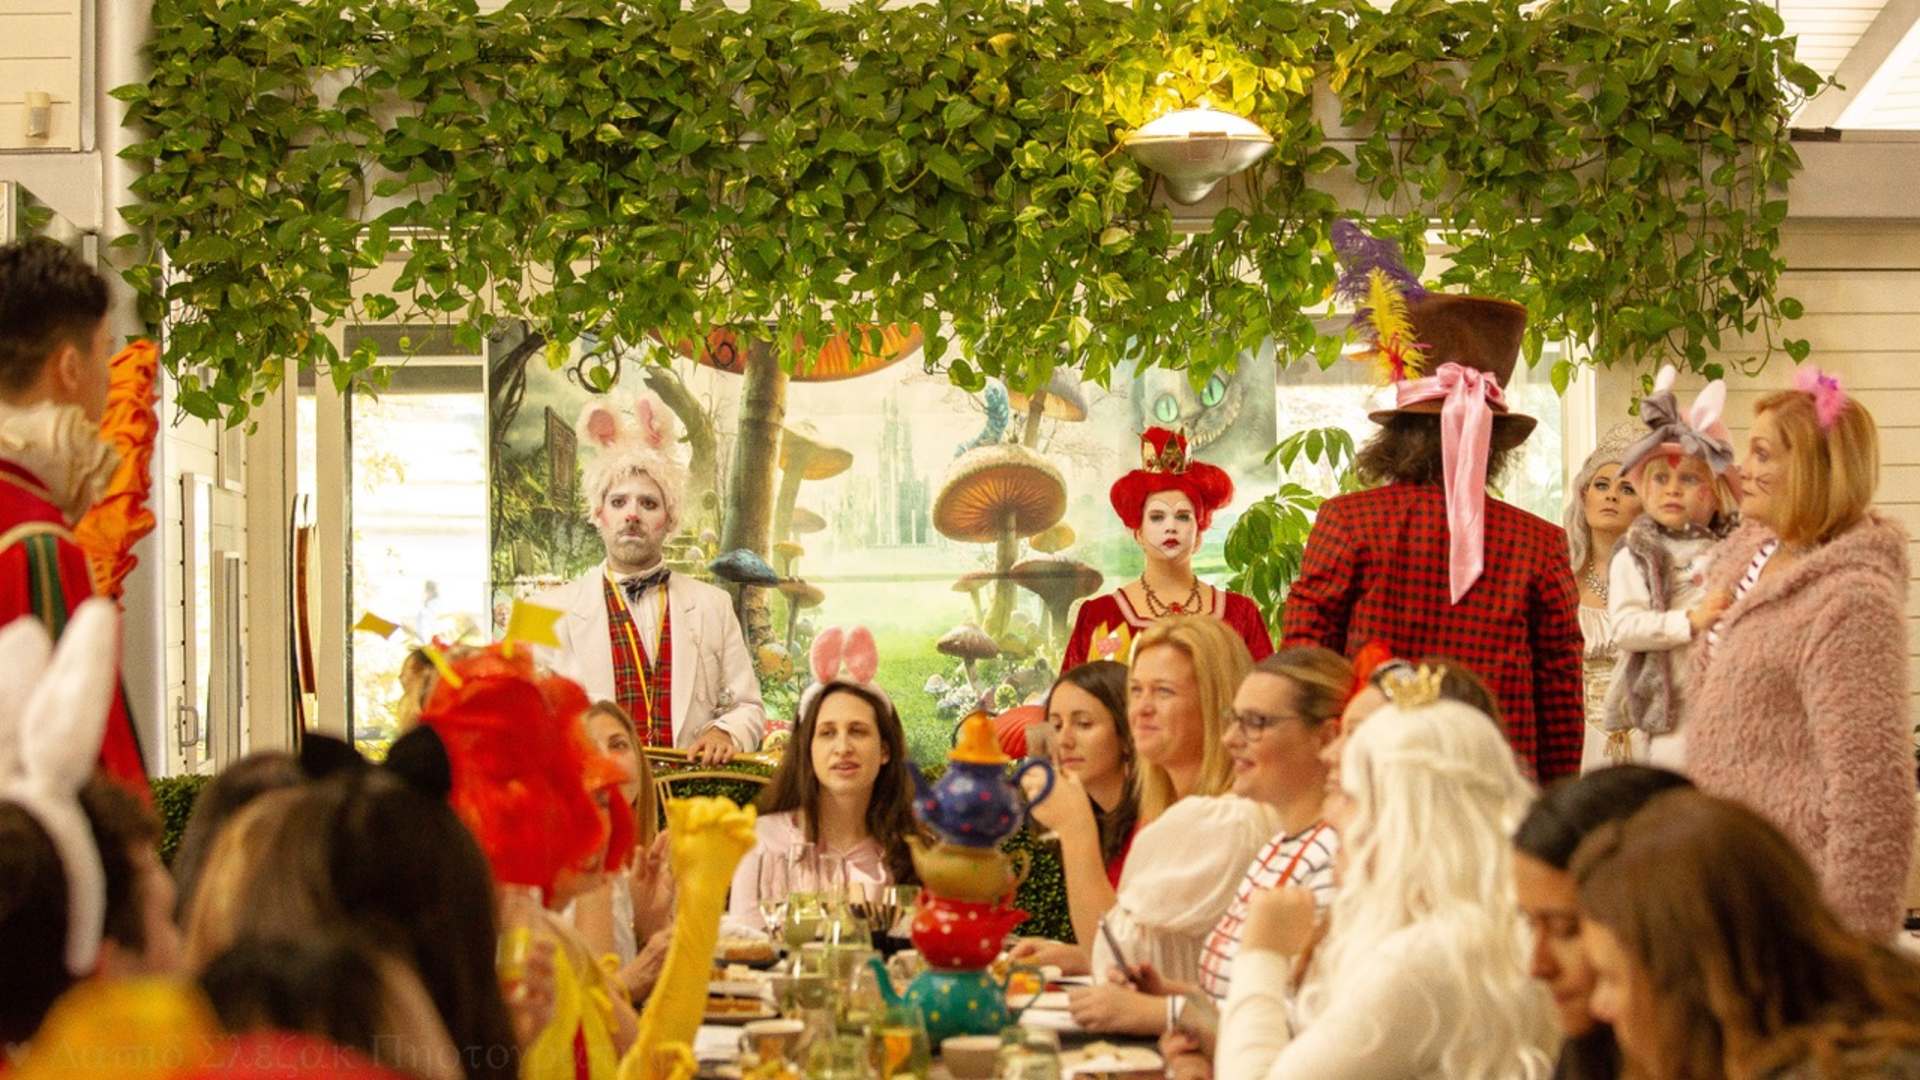 You Can Join a Boozy Mad Hatter's Tea Party at This 'Alice in Wonderland'-Inspired Pop-Up Bar